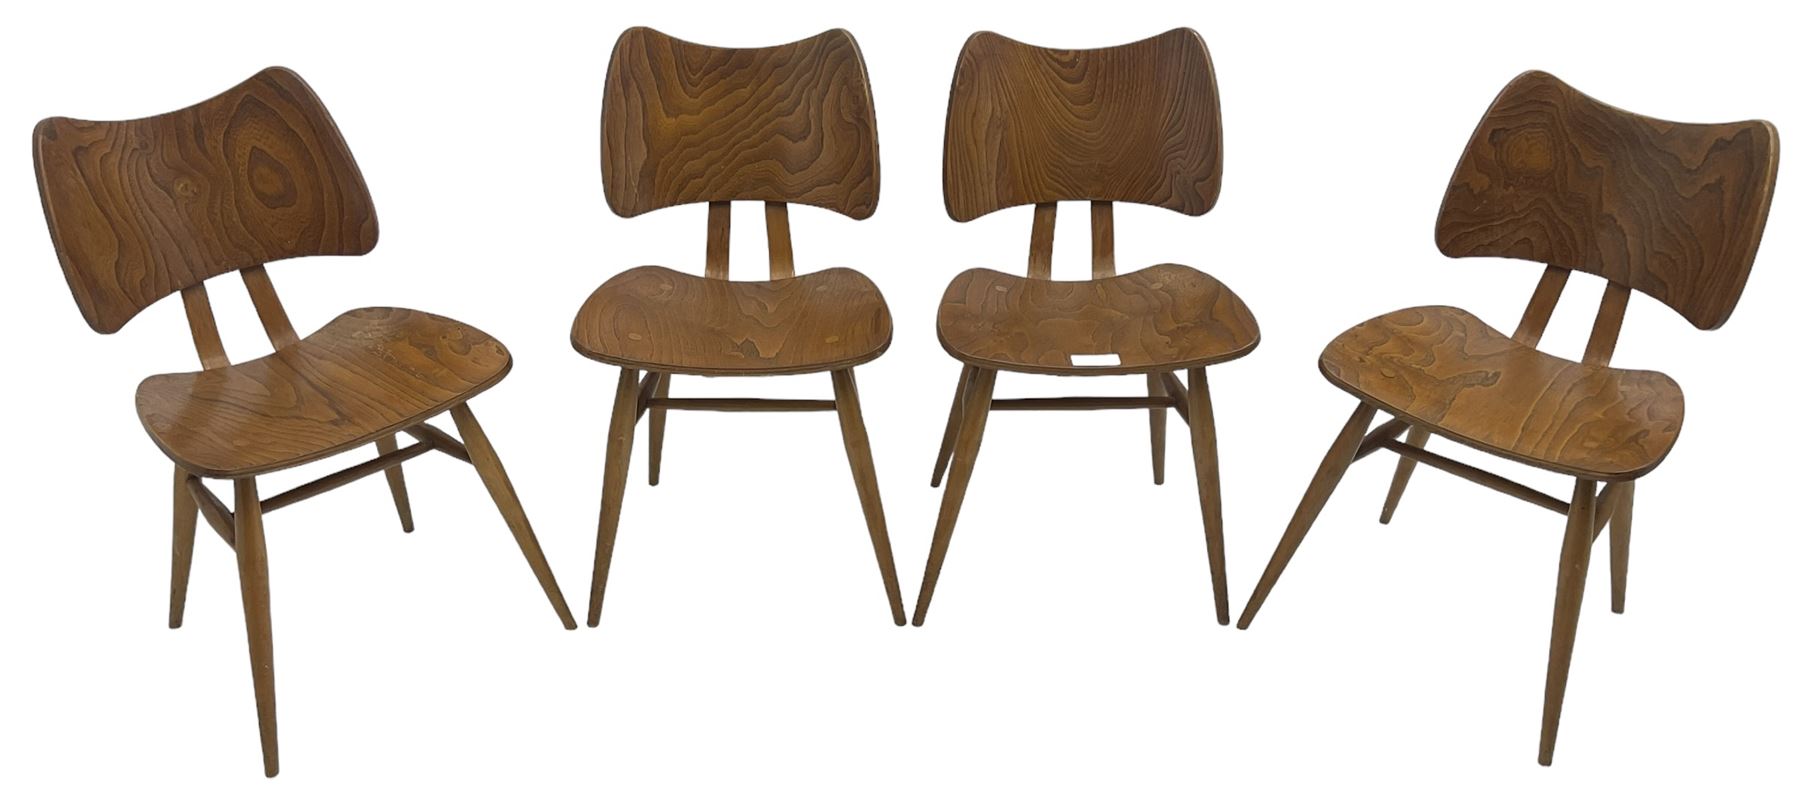 Lucian Ercolani - set of four ercol elm and beech model '401' dining chairs - Image 31 of 42